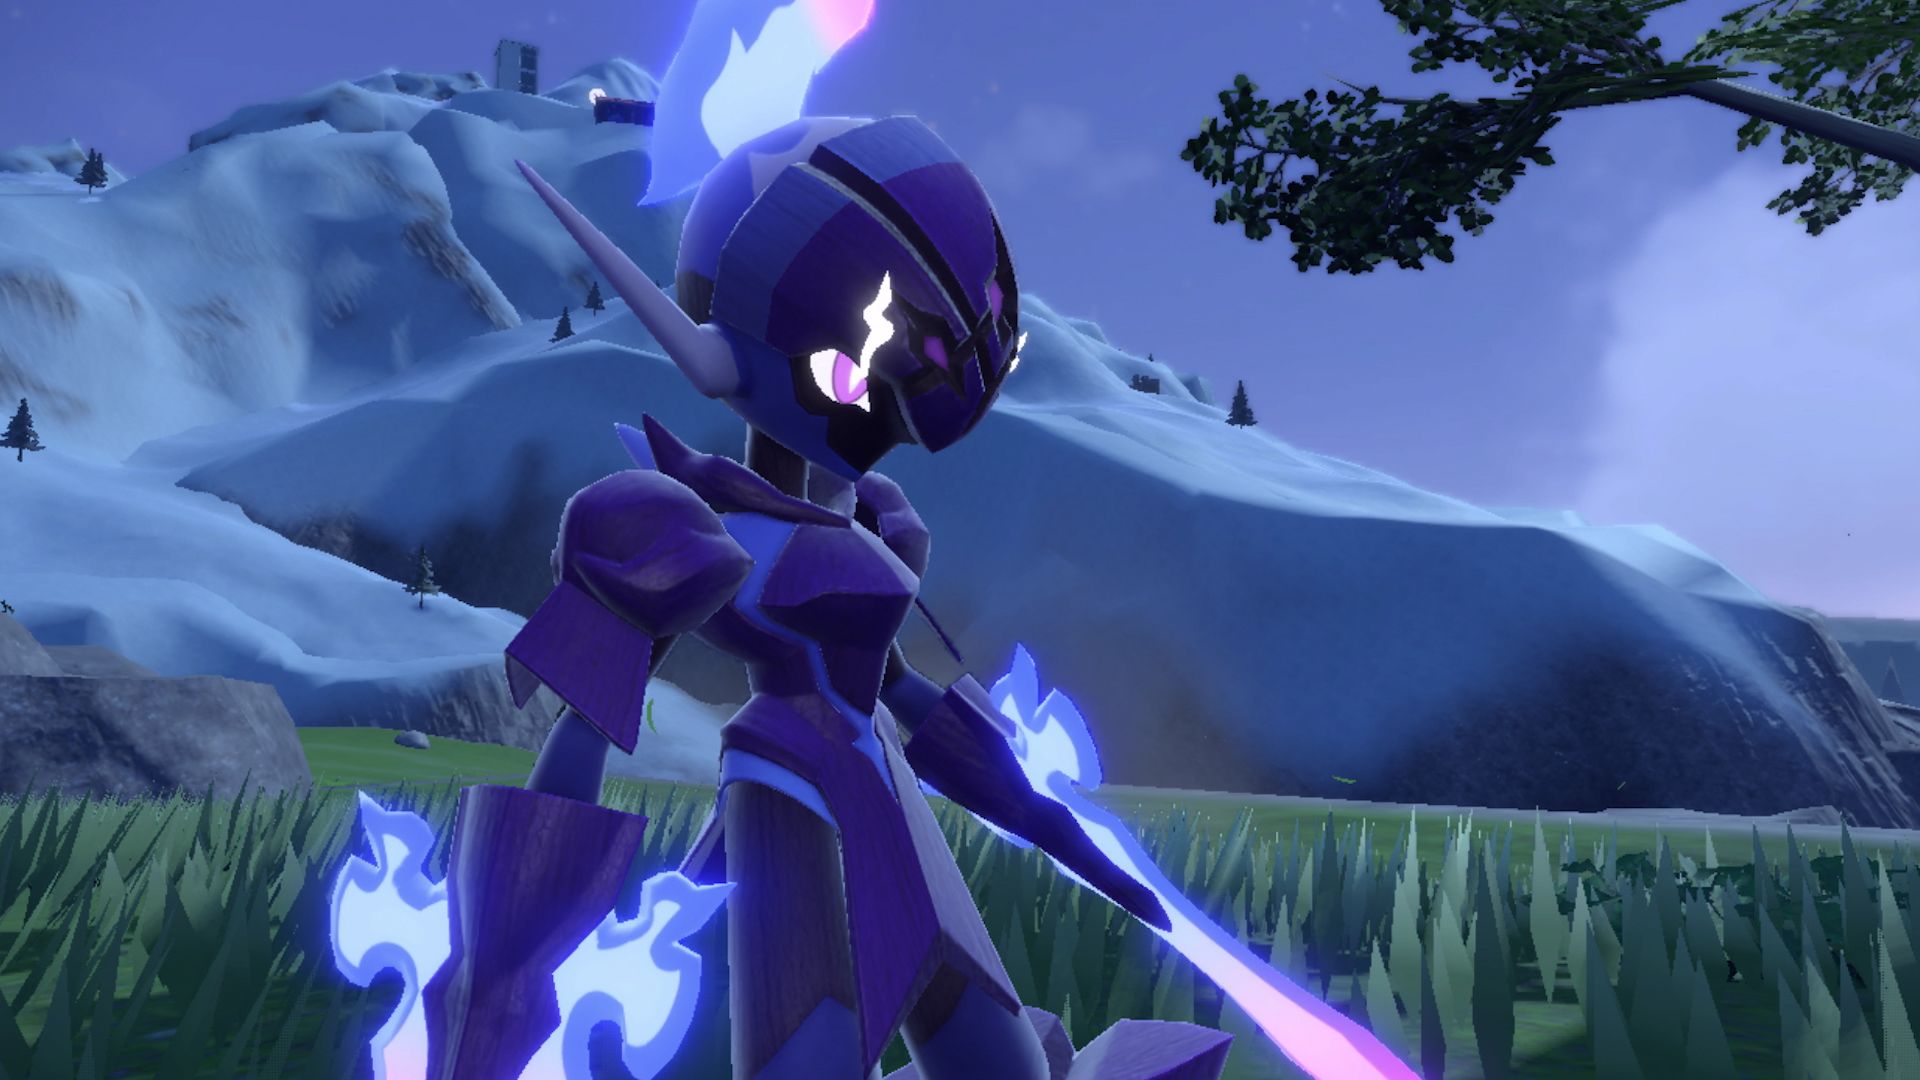 Version exclusive Pokémon Ceruledge standing in front of a mountain. It’s purple with swords for arms.